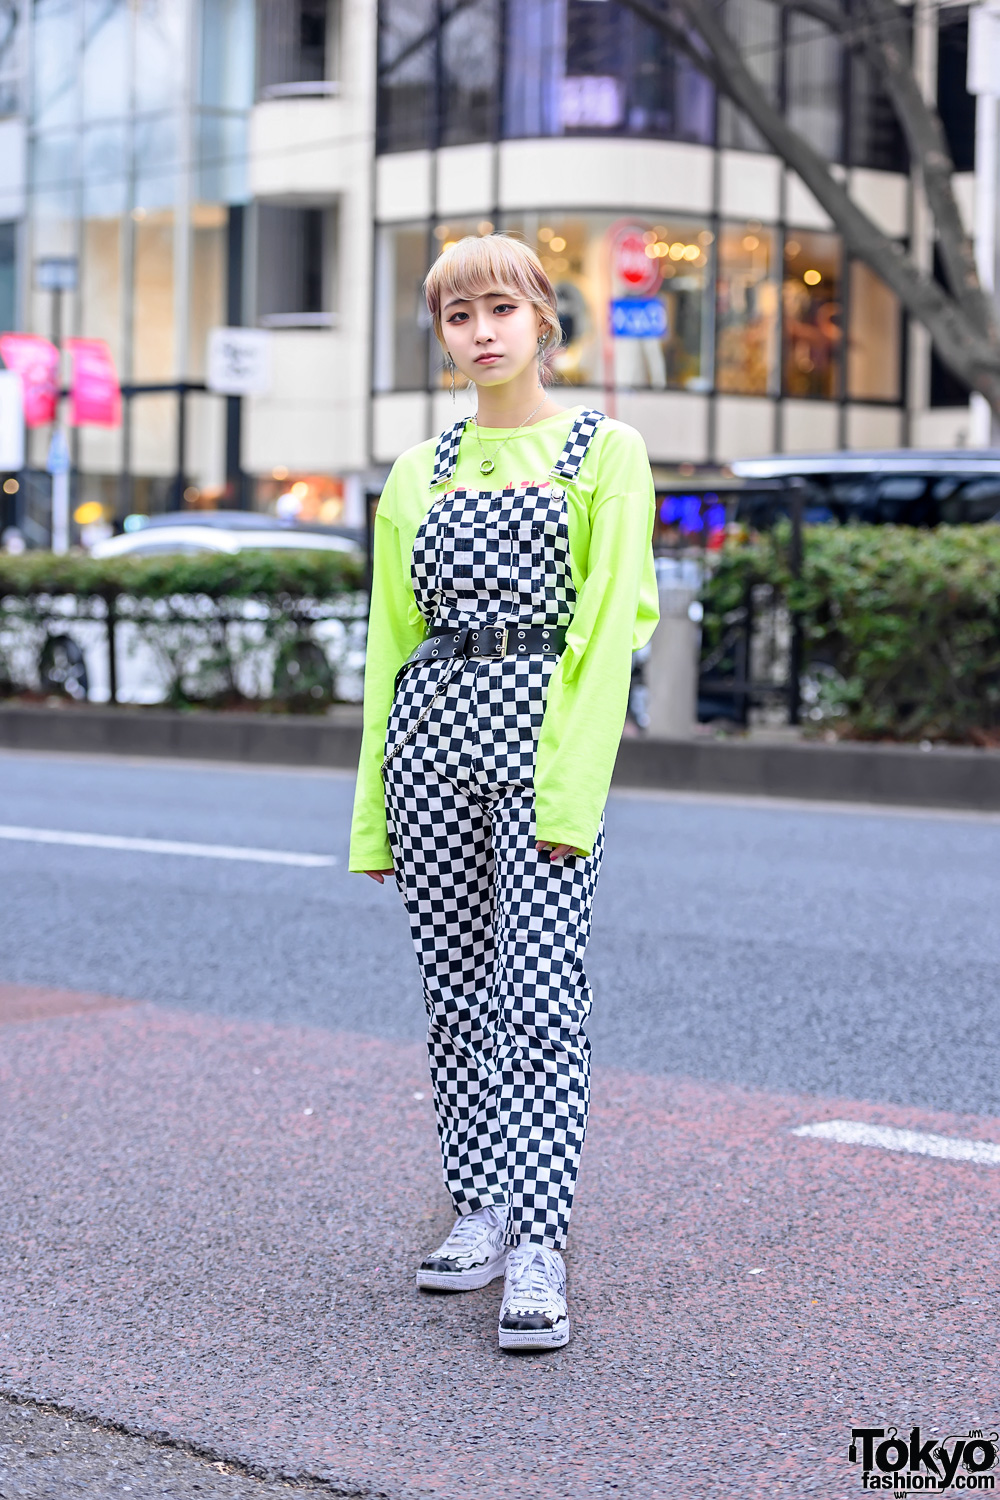 Harajuku Girl in Checkered Overalls, &Ellecy T-Shirt & Hand Painted Nike Air Force Ones